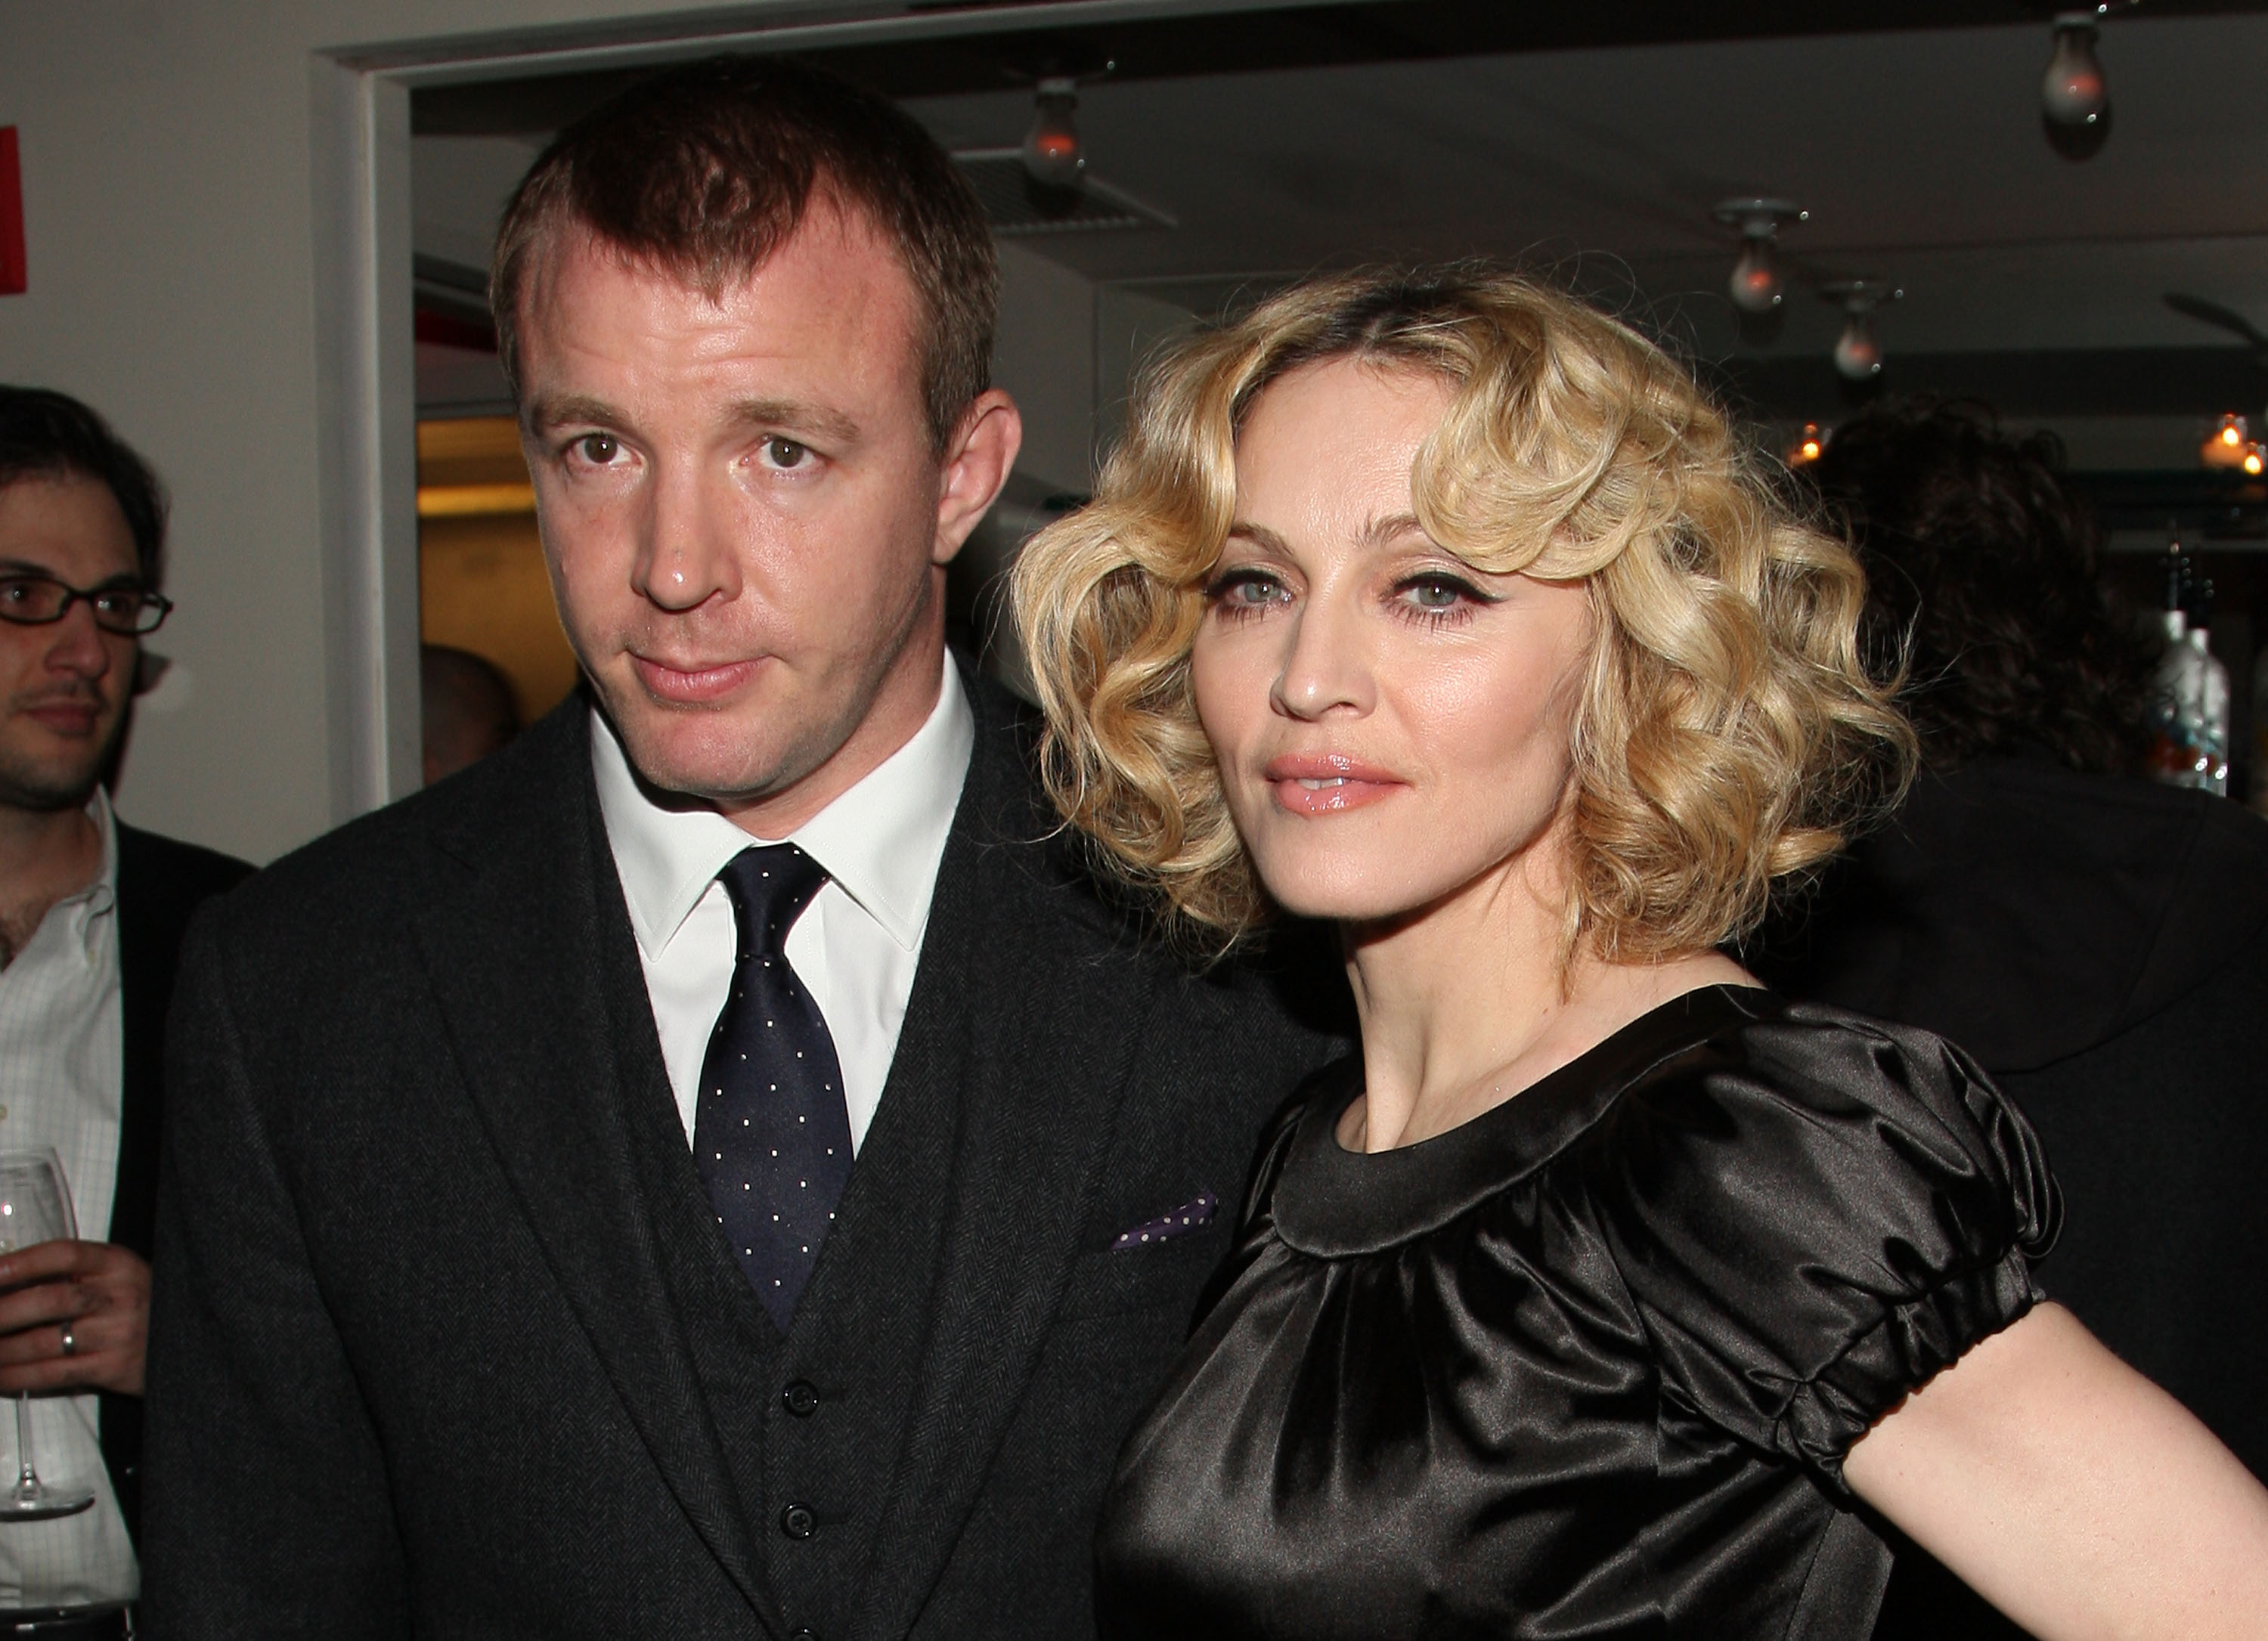 Madonna and Guy Ritchie in front of people